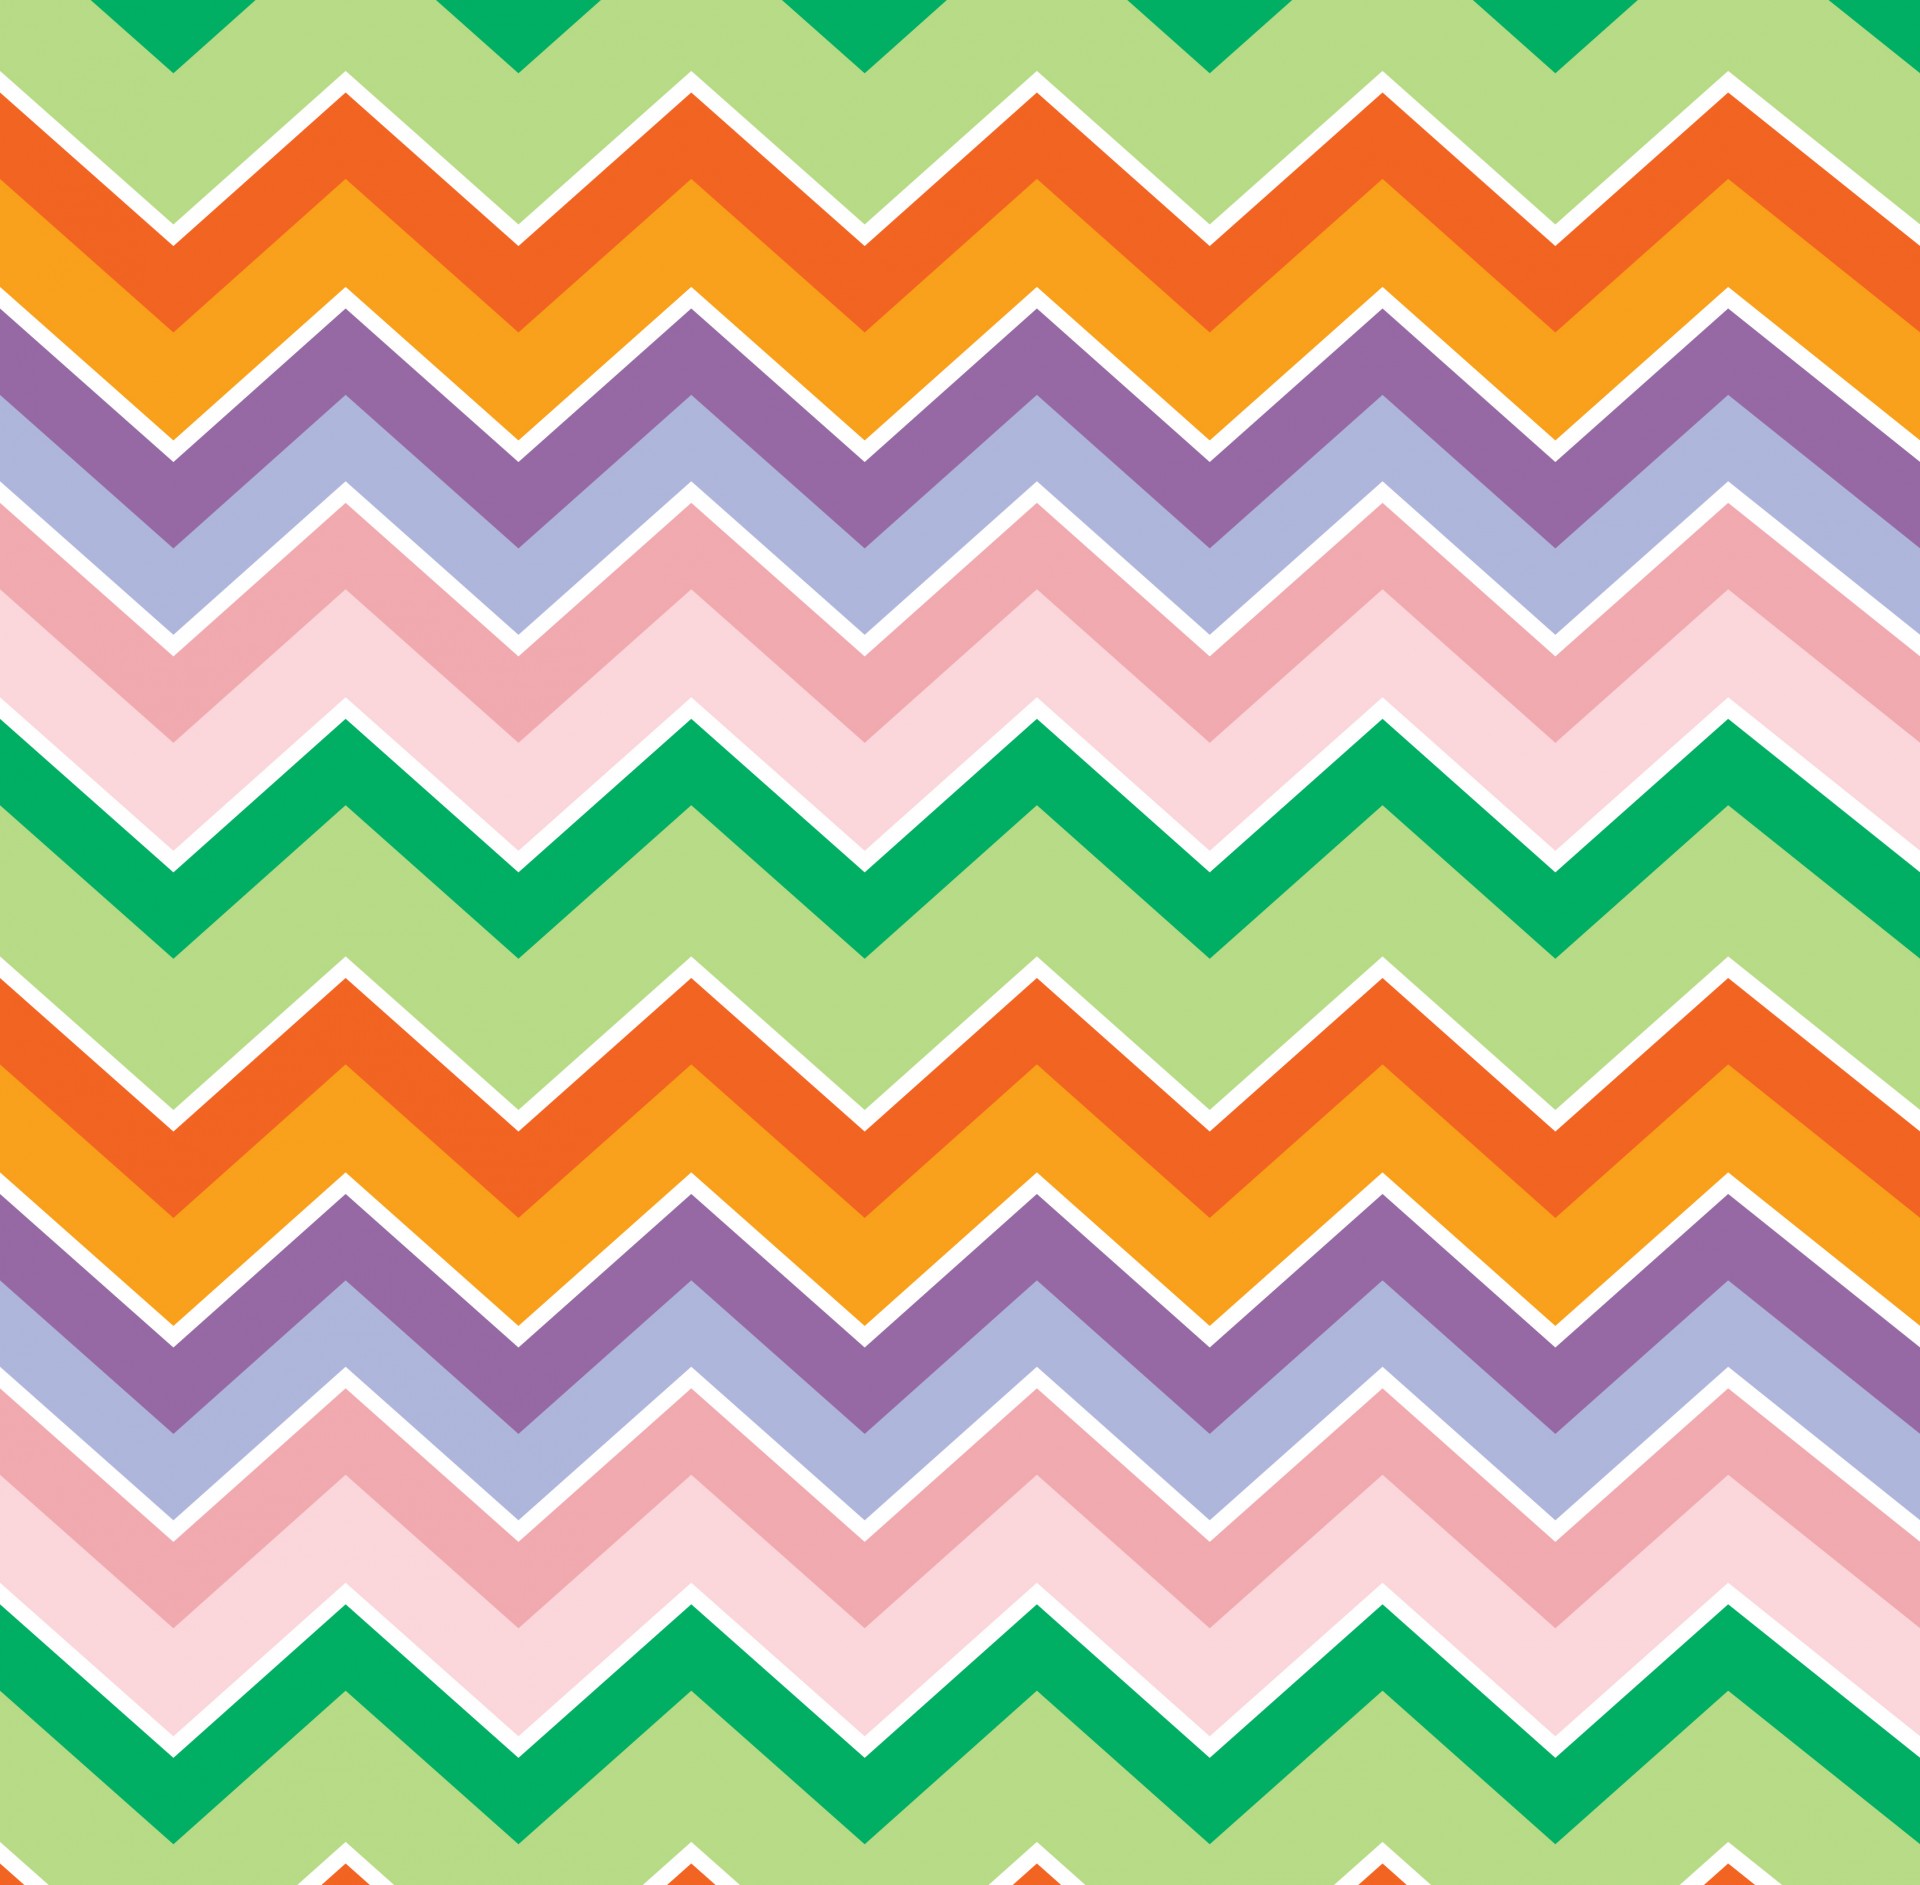 Chevrons Zigzag Colorful Background